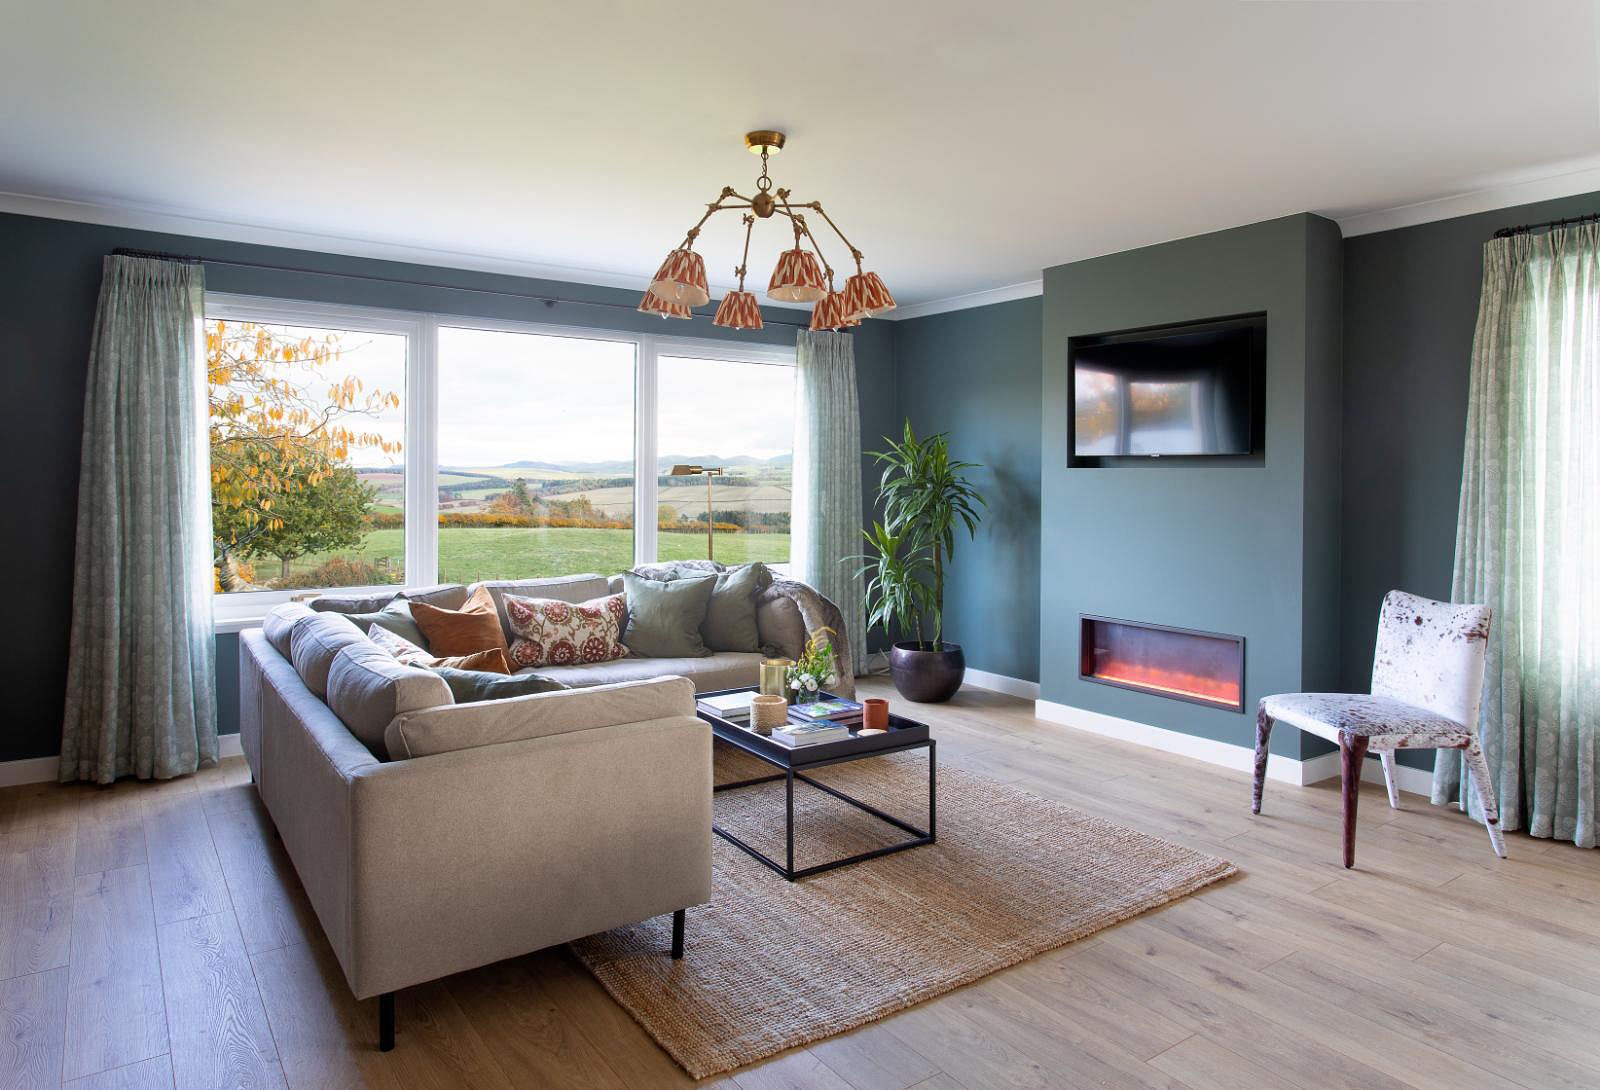 Overthickside - bright and spacious sitting room in the open-plan living space